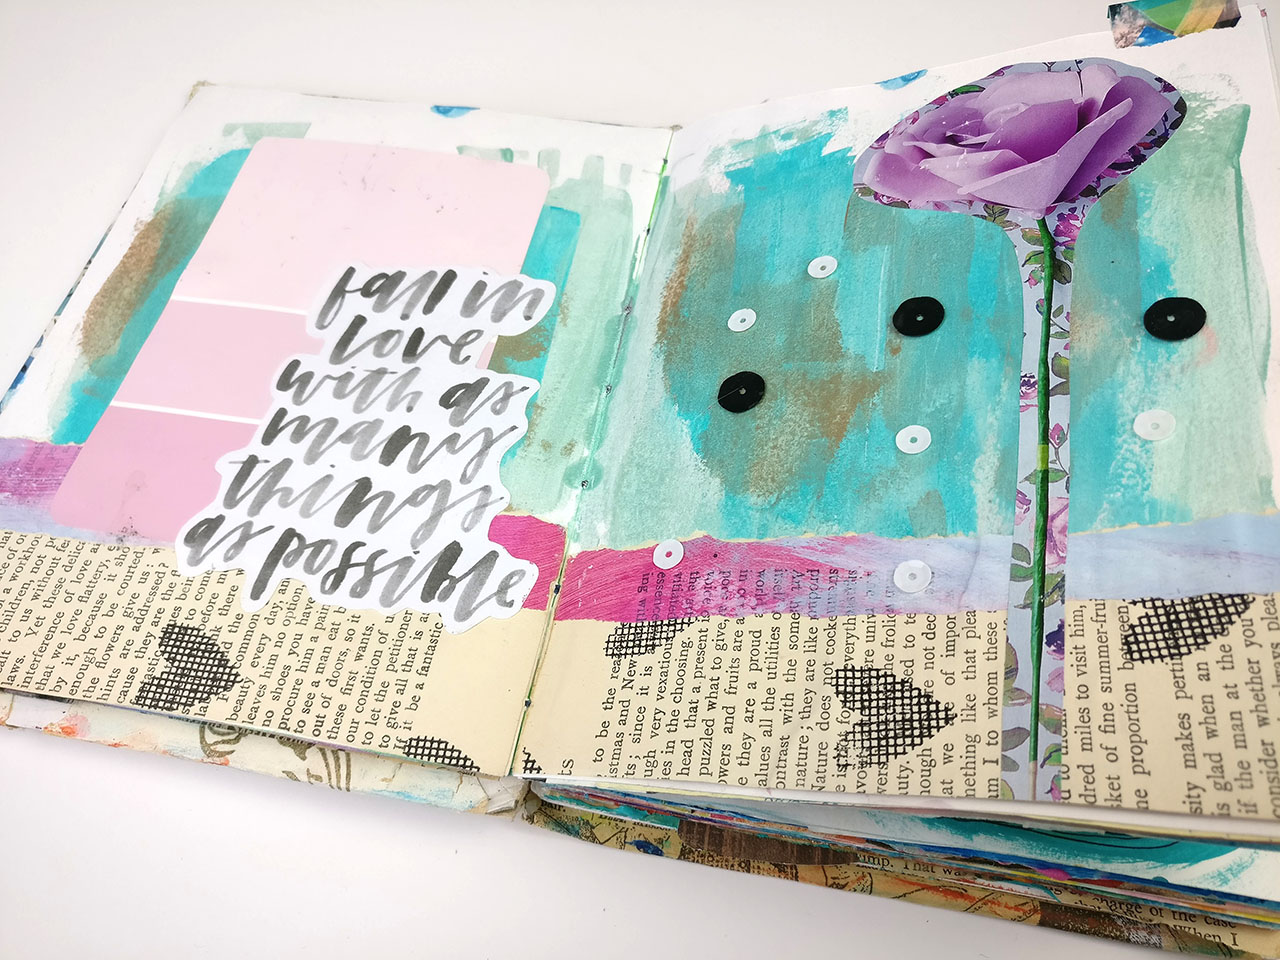  Journal Flip Through 2018 | Part Two  Join me as we travel back in time to see another of my early journals! I flip through my second art journal with you a reminisce about pages past. I wanted to show you that everyone starts somewhere in their art